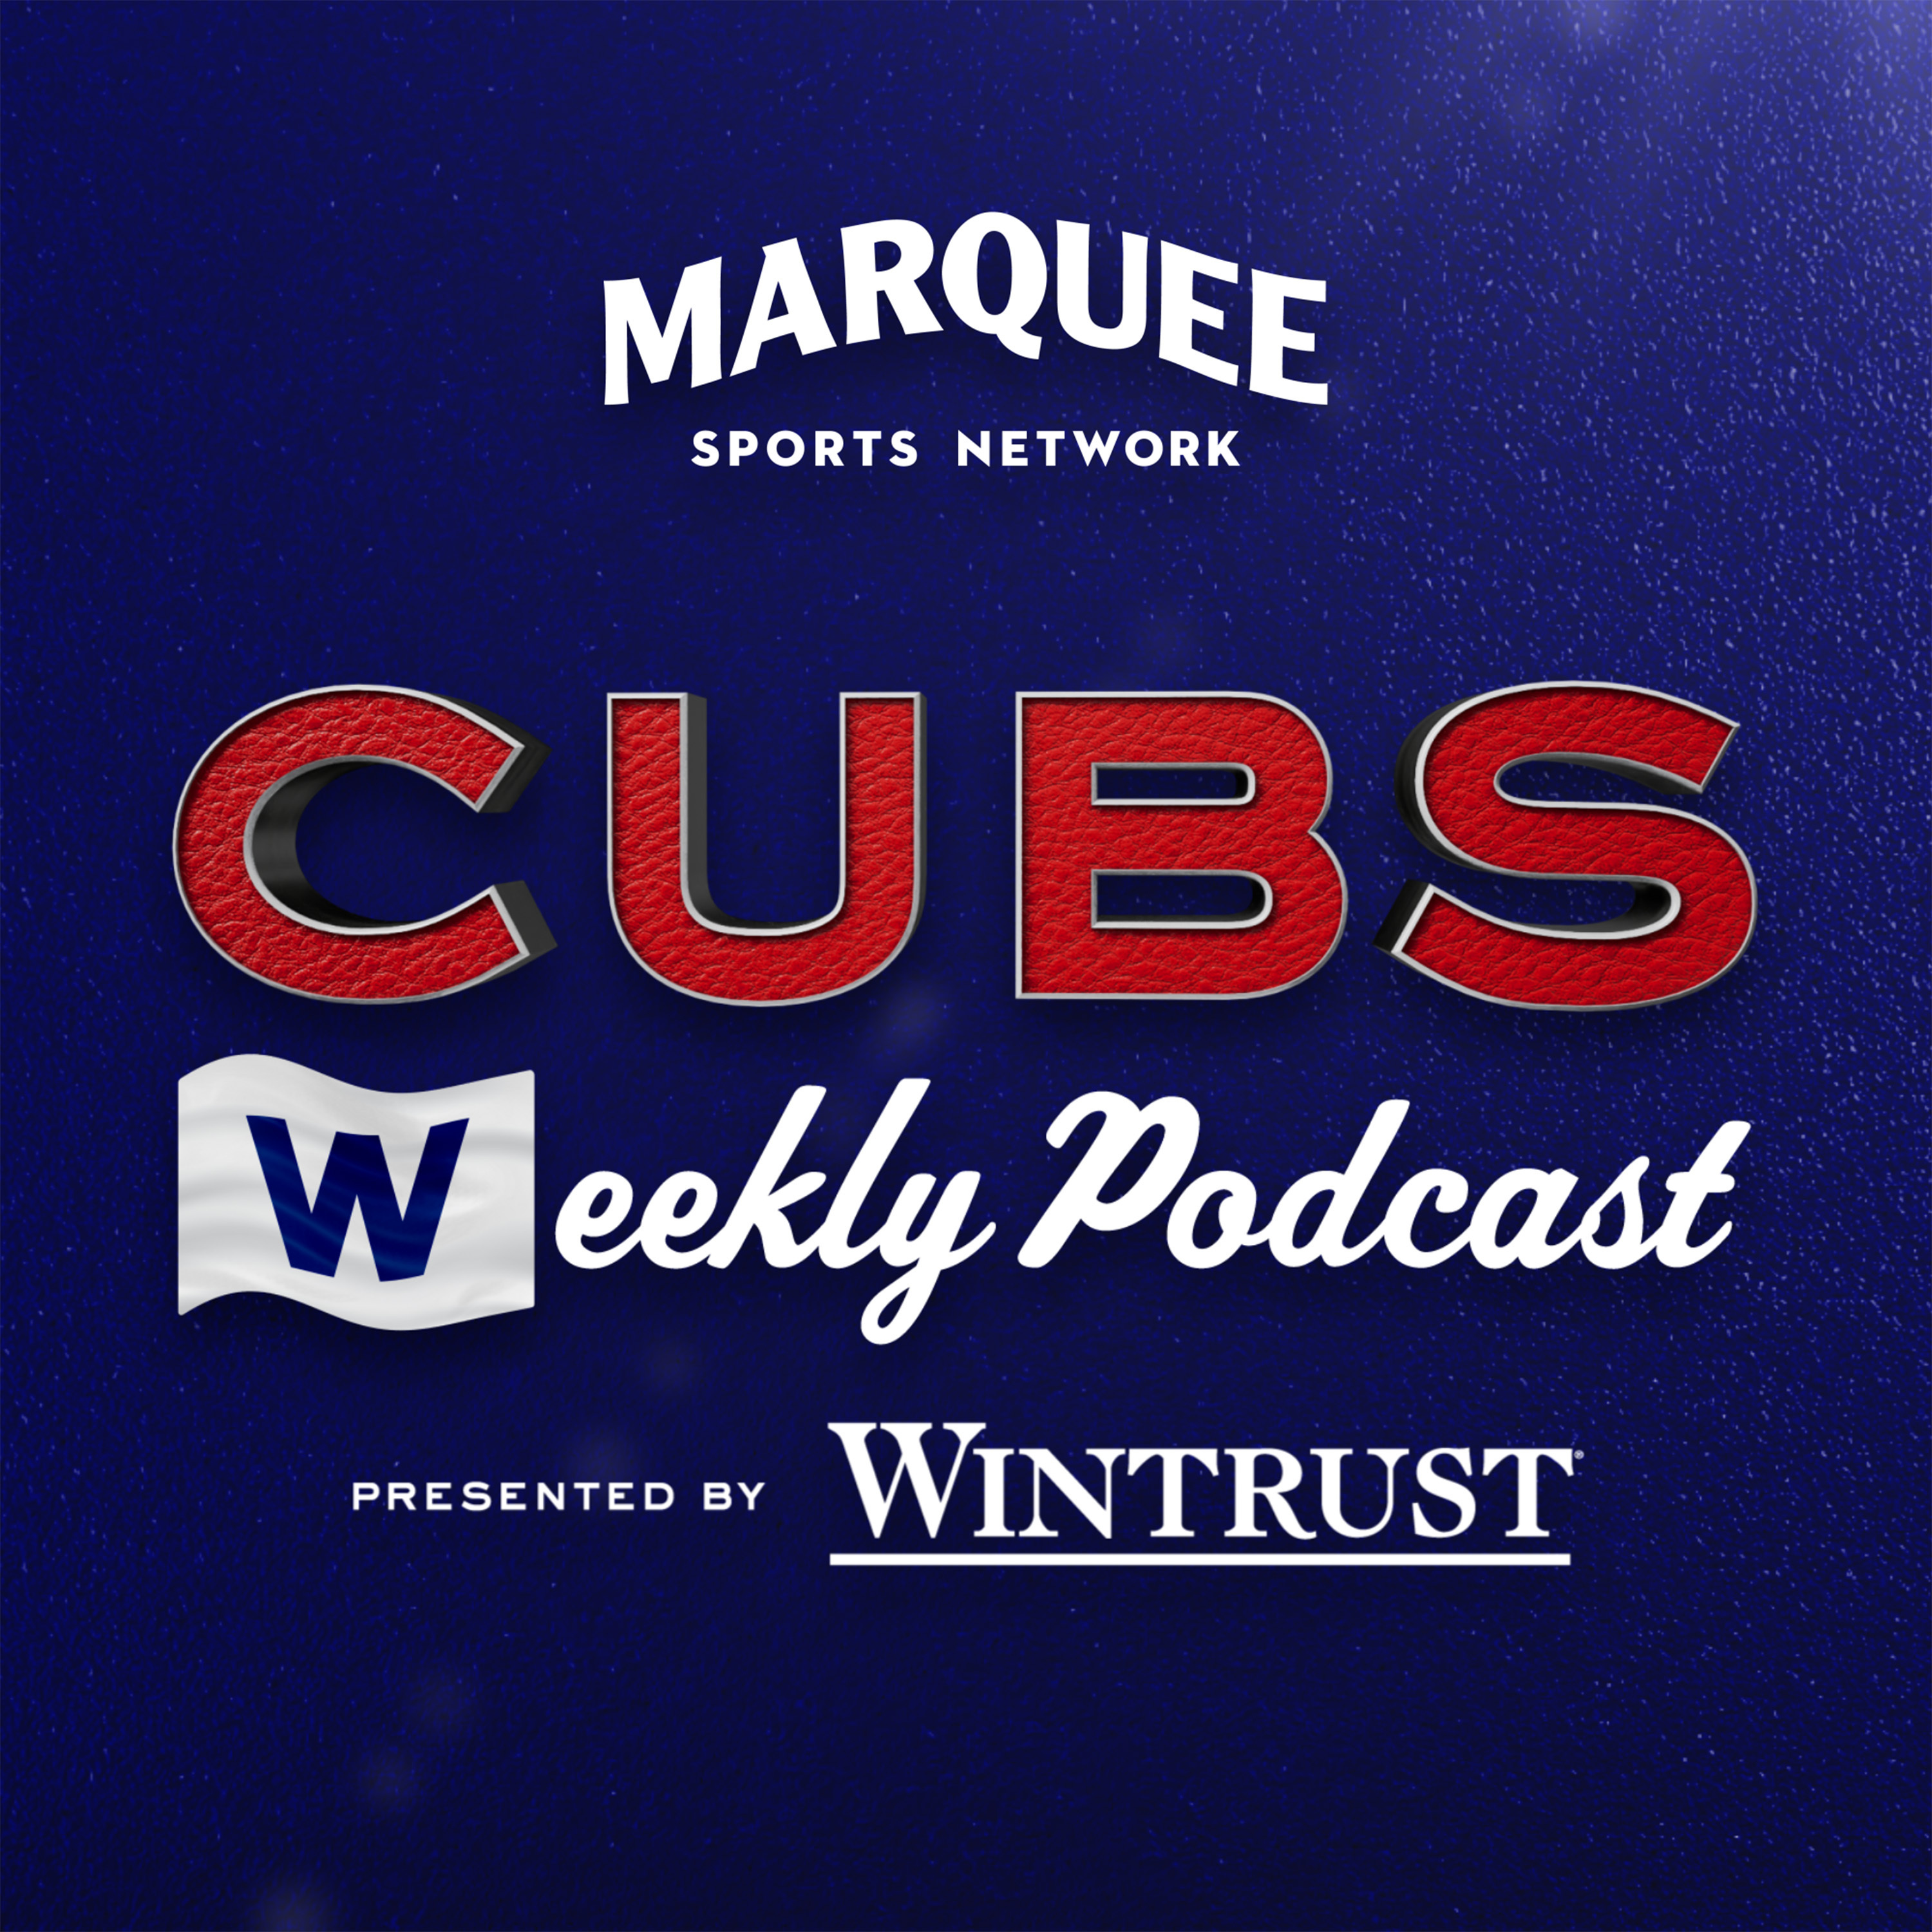 Good news for Cubs fans without Marquee Sports Network